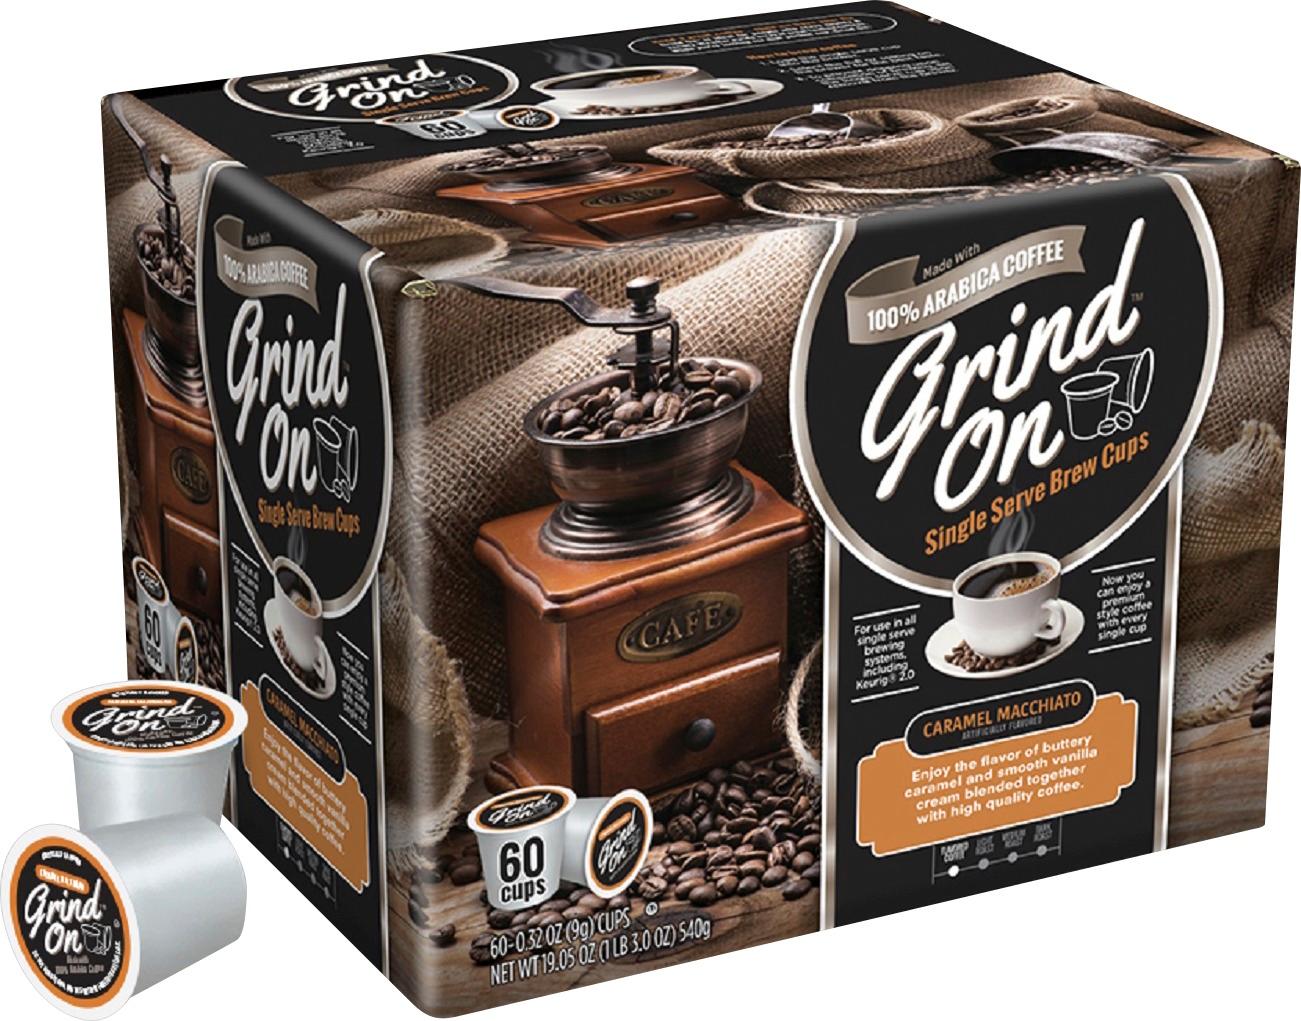 Grind On - Caramel Macchiato Coffee Pods (60-Pack)